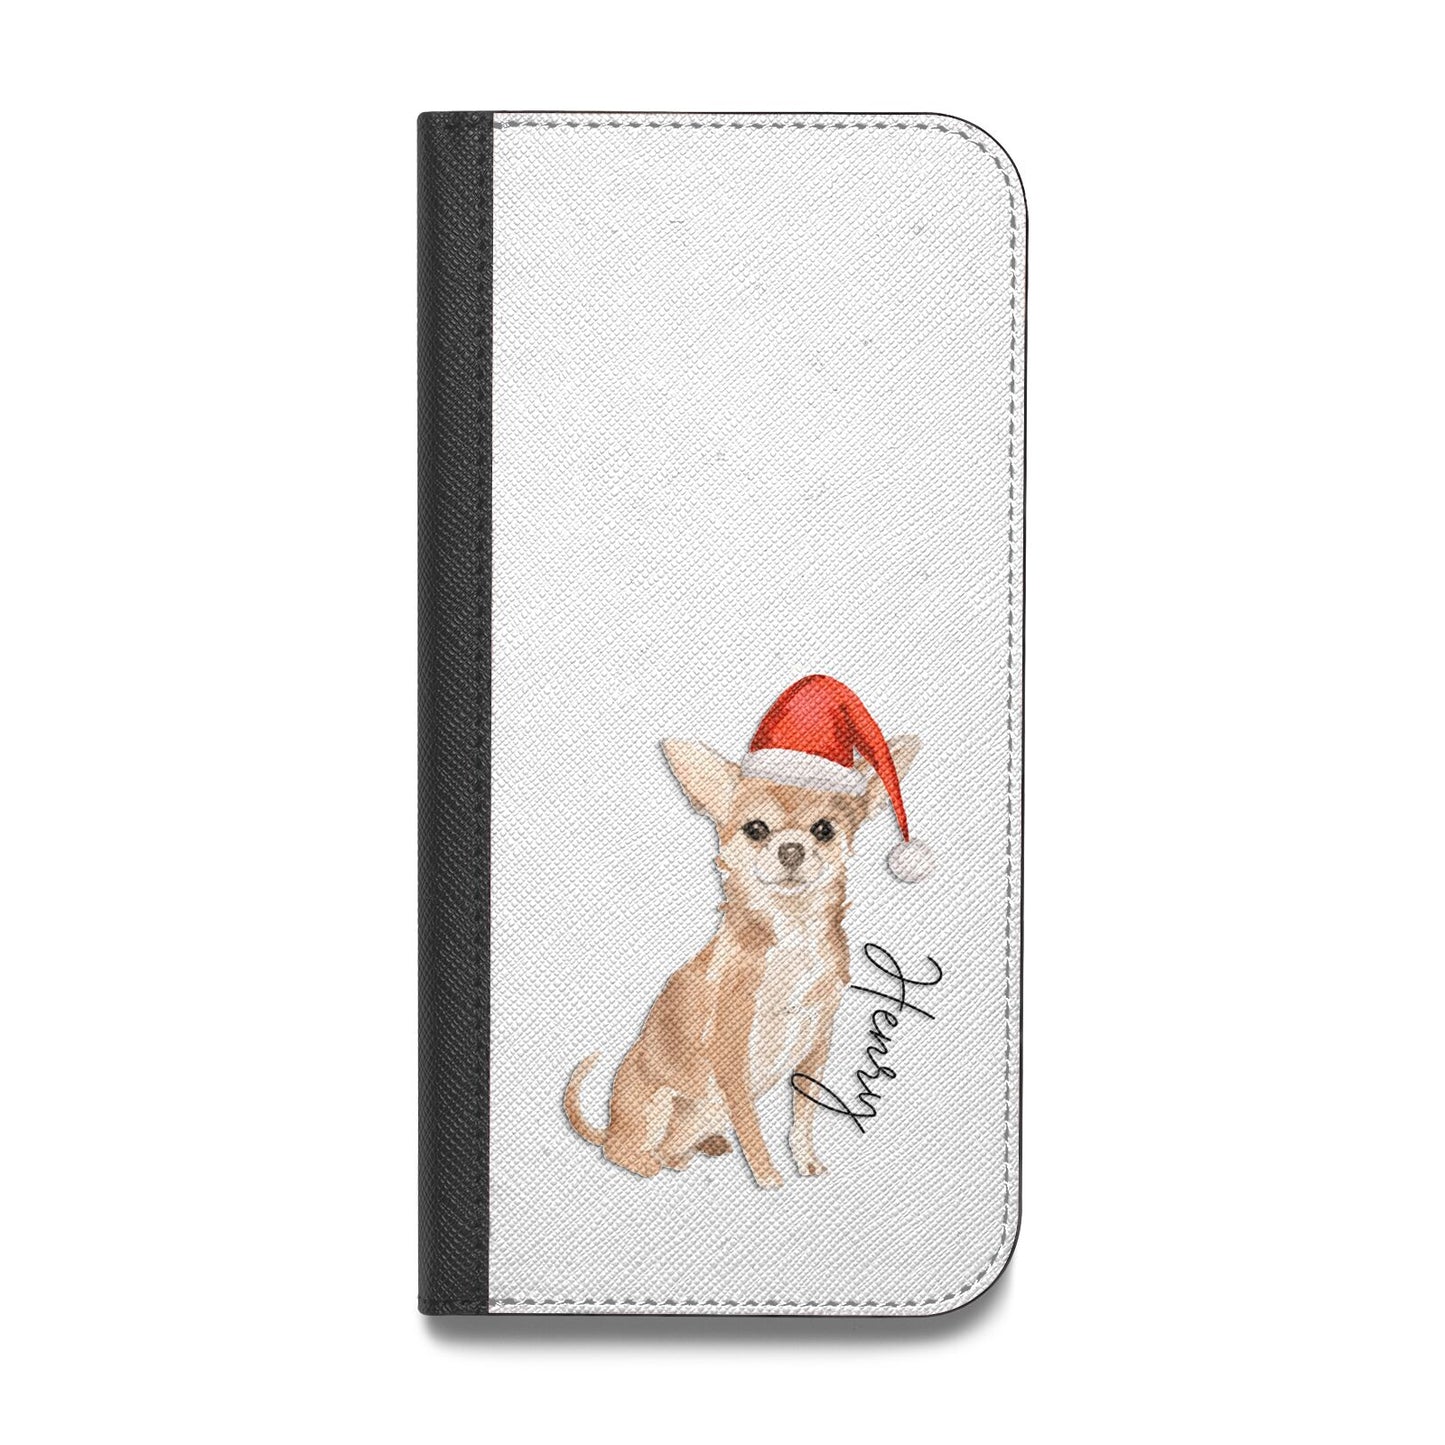 Personalised Christmas Chihuahua Vegan Leather Flip Samsung Case